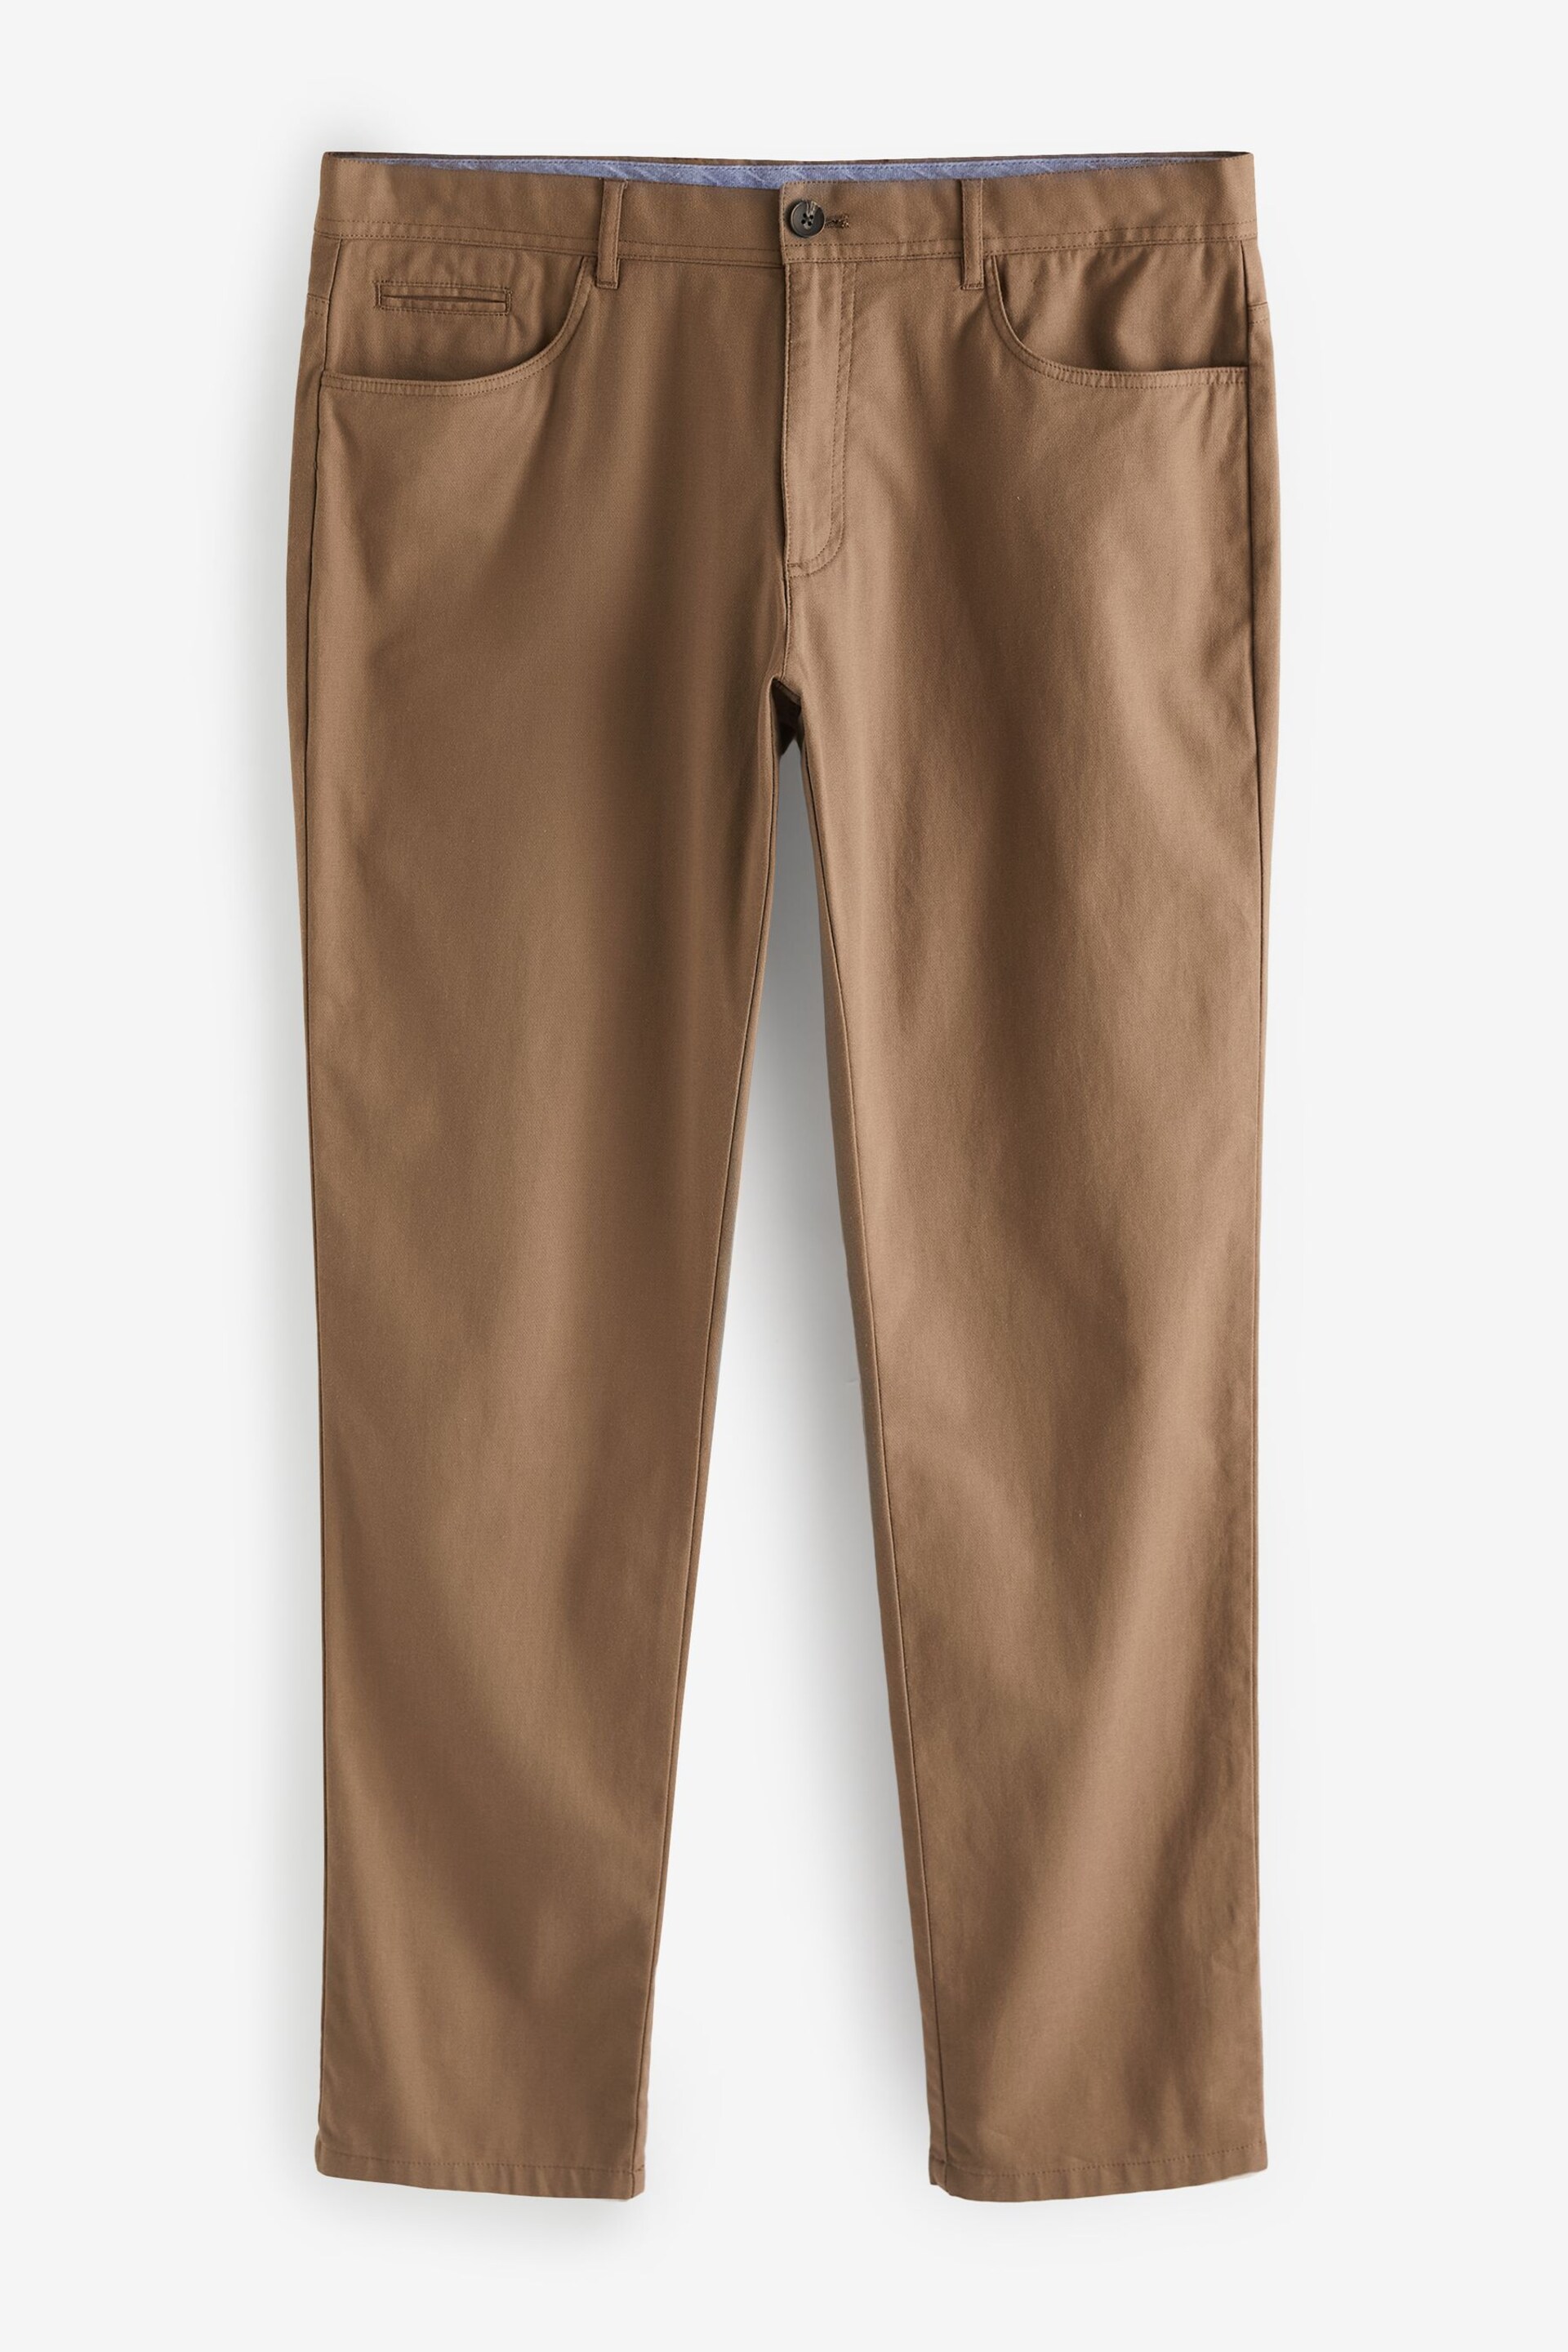 Tan Brown 5 Pocket Smart Textured Chino Trousers - Image 6 of 9